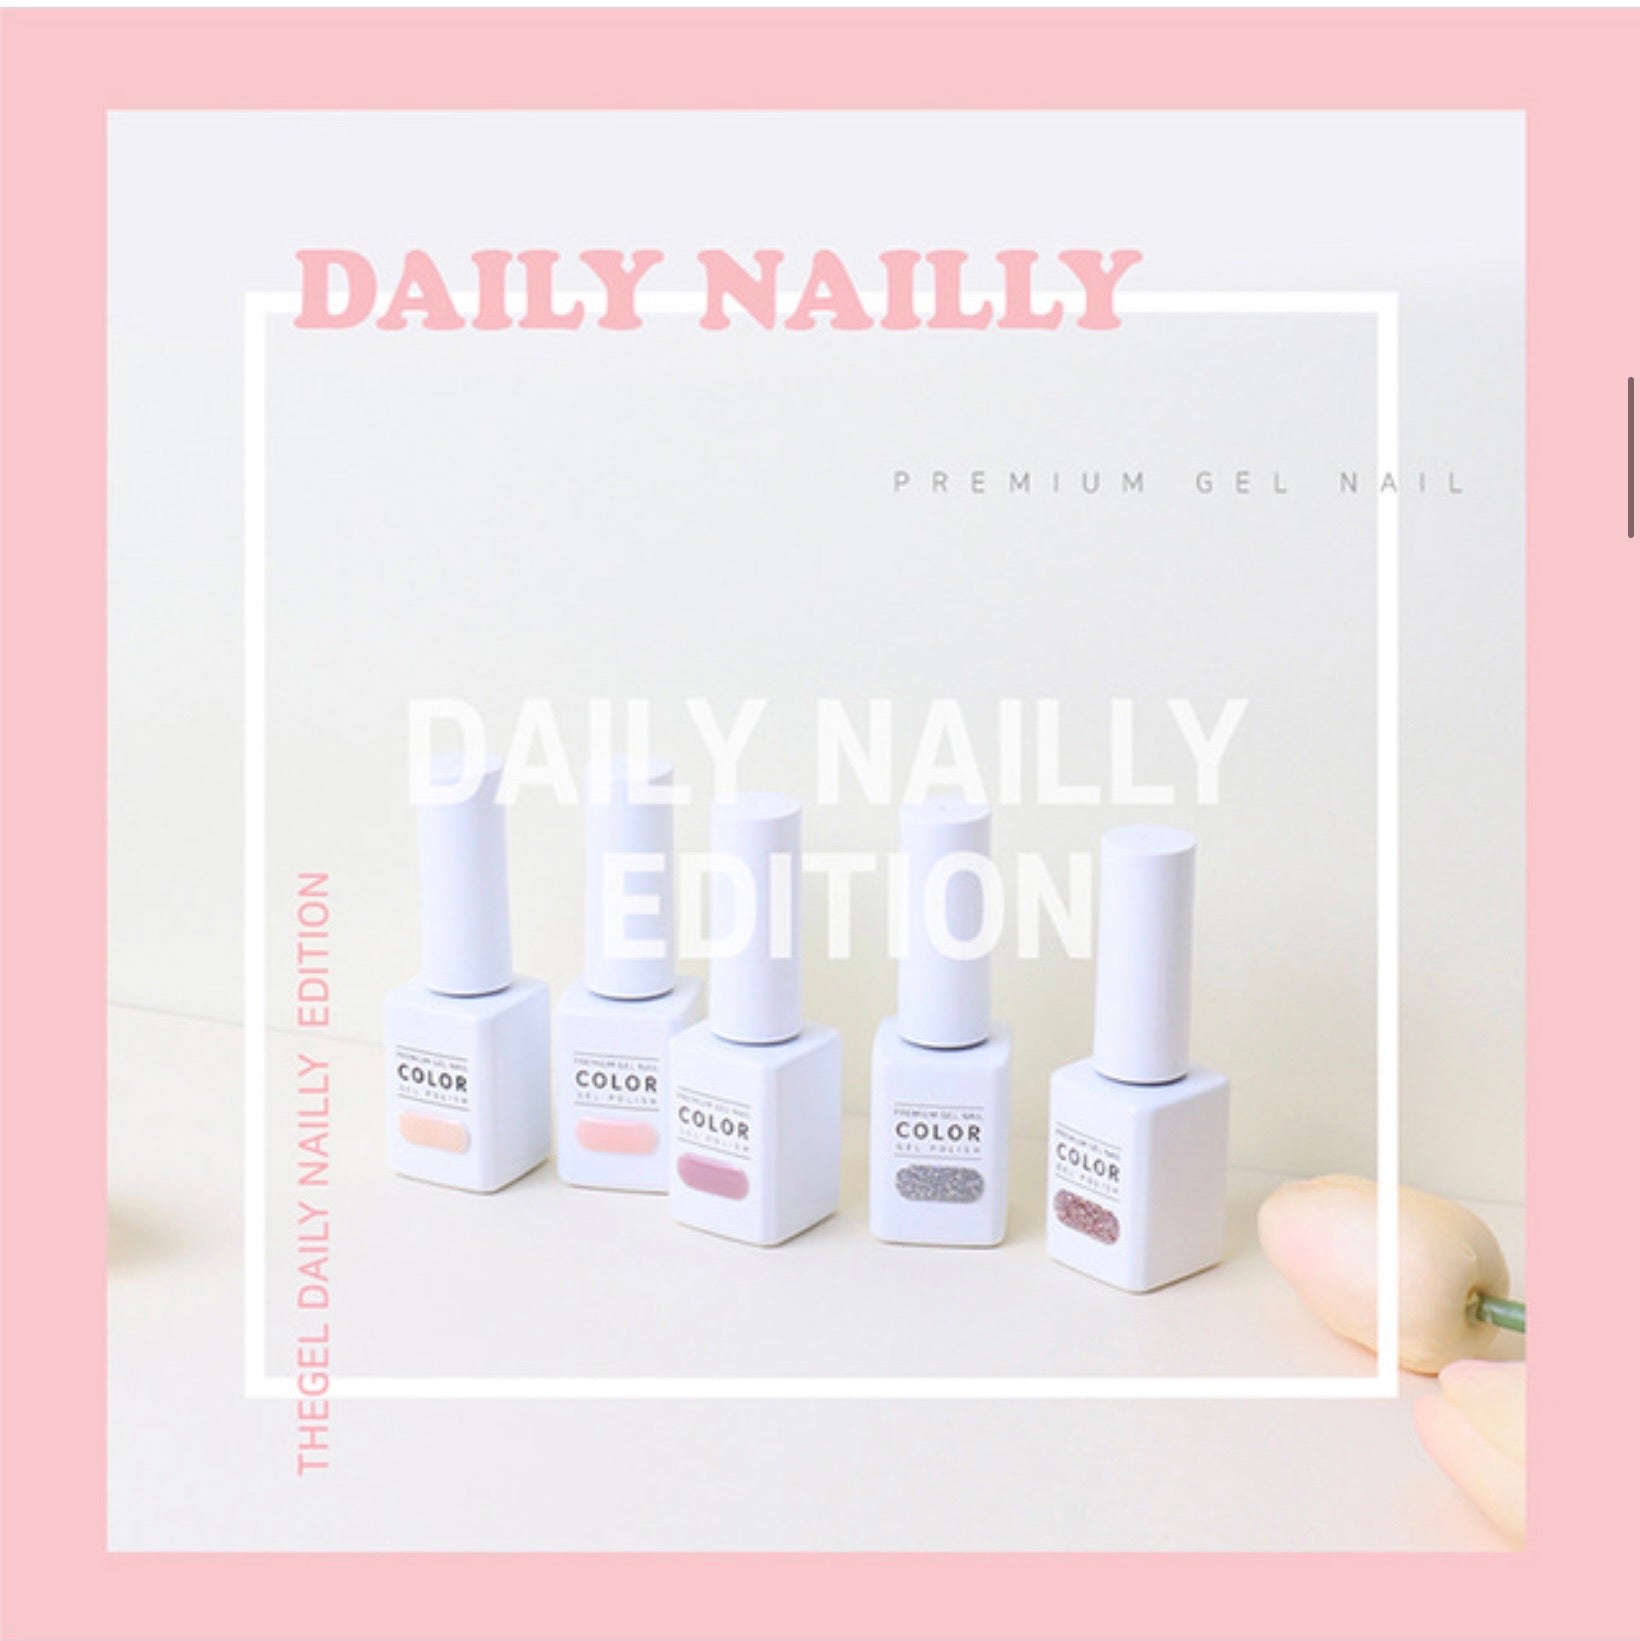 THE GEL daily naily